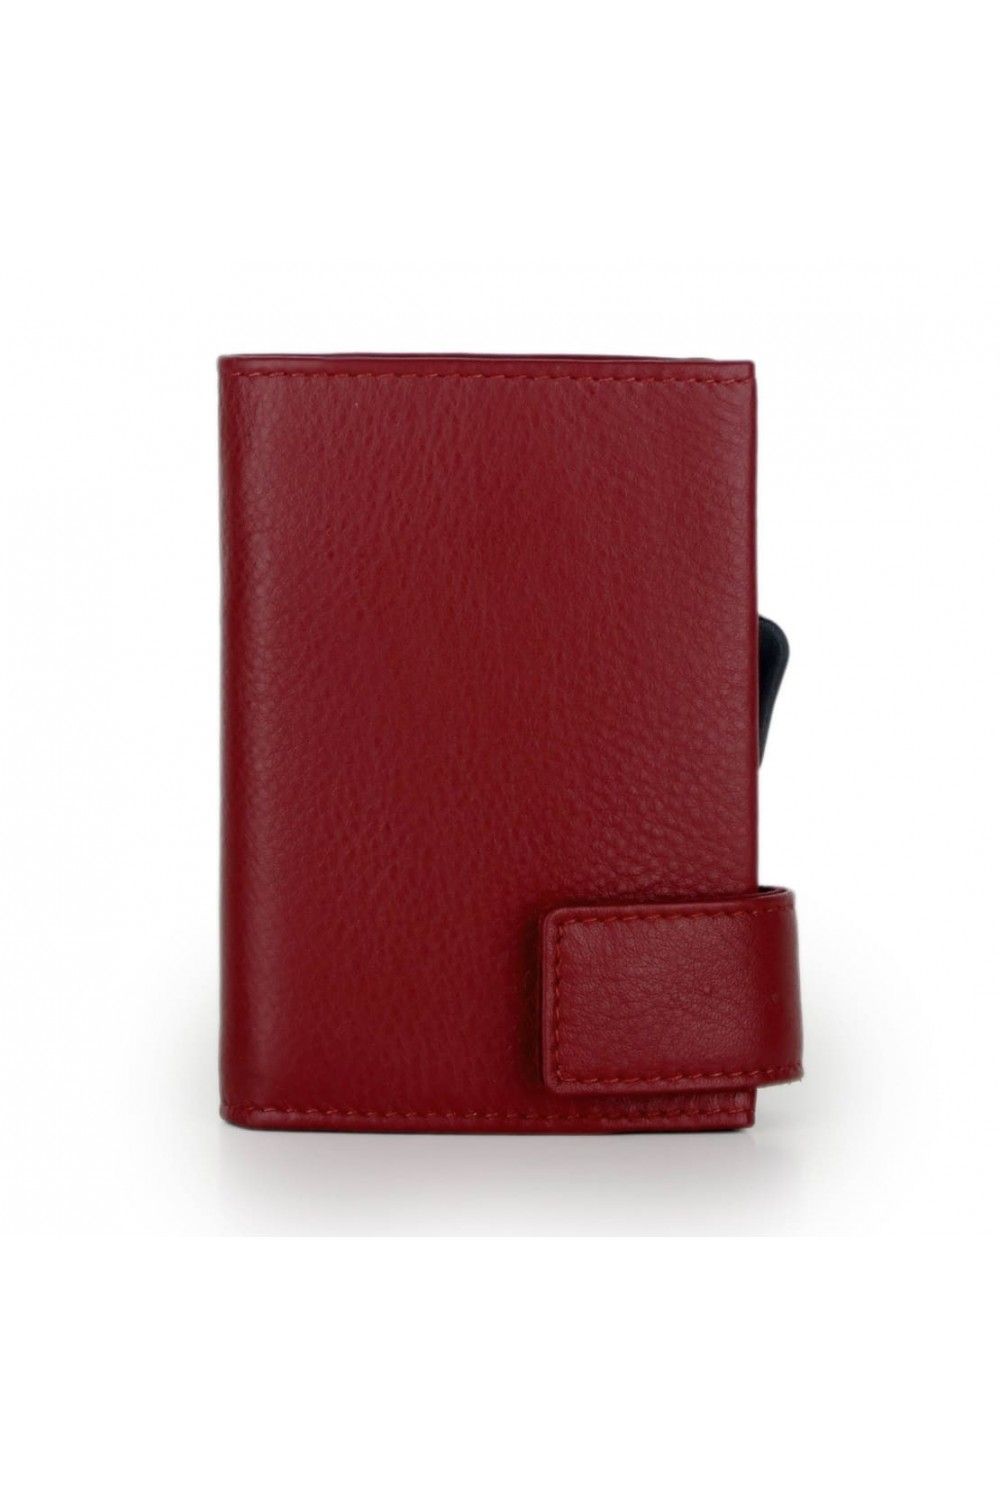 SecWal Card Case XL DK Leather Red